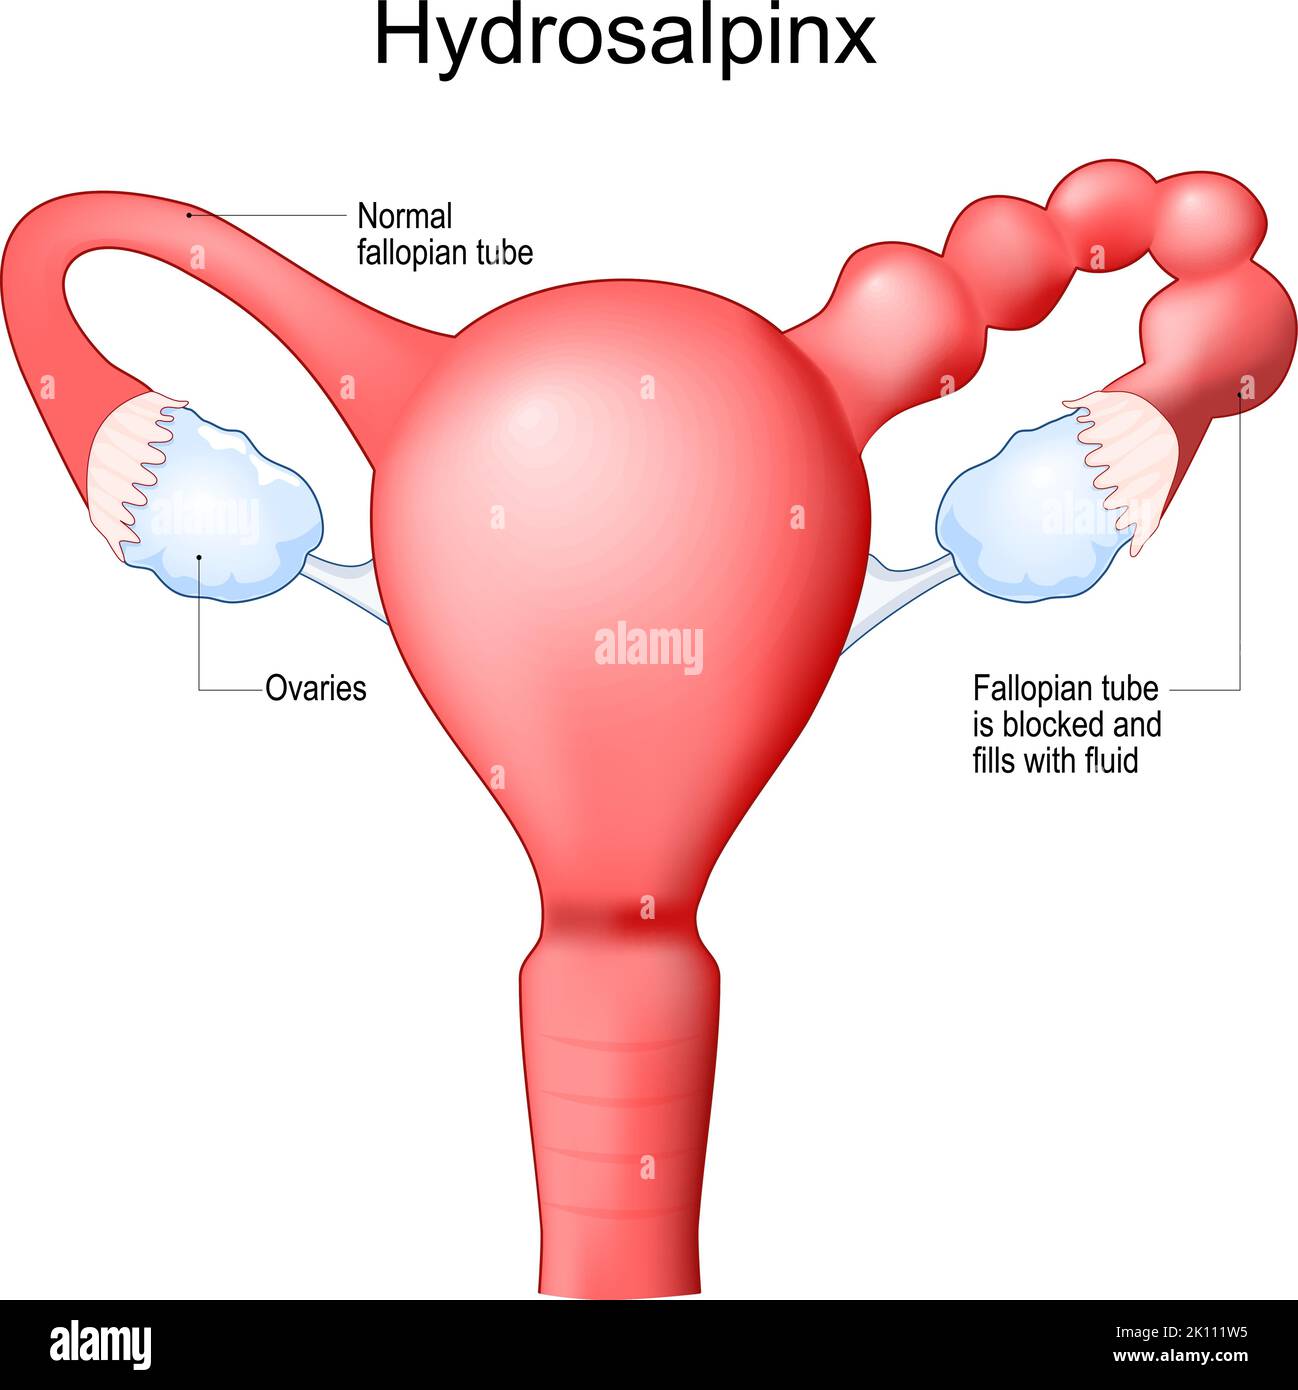 Human uterus with blocked of Fallopian tube. Hydrosalpinx cause infertility. Female reproductive system. Frontal view. Human anatomy. Realistic Stock Vector